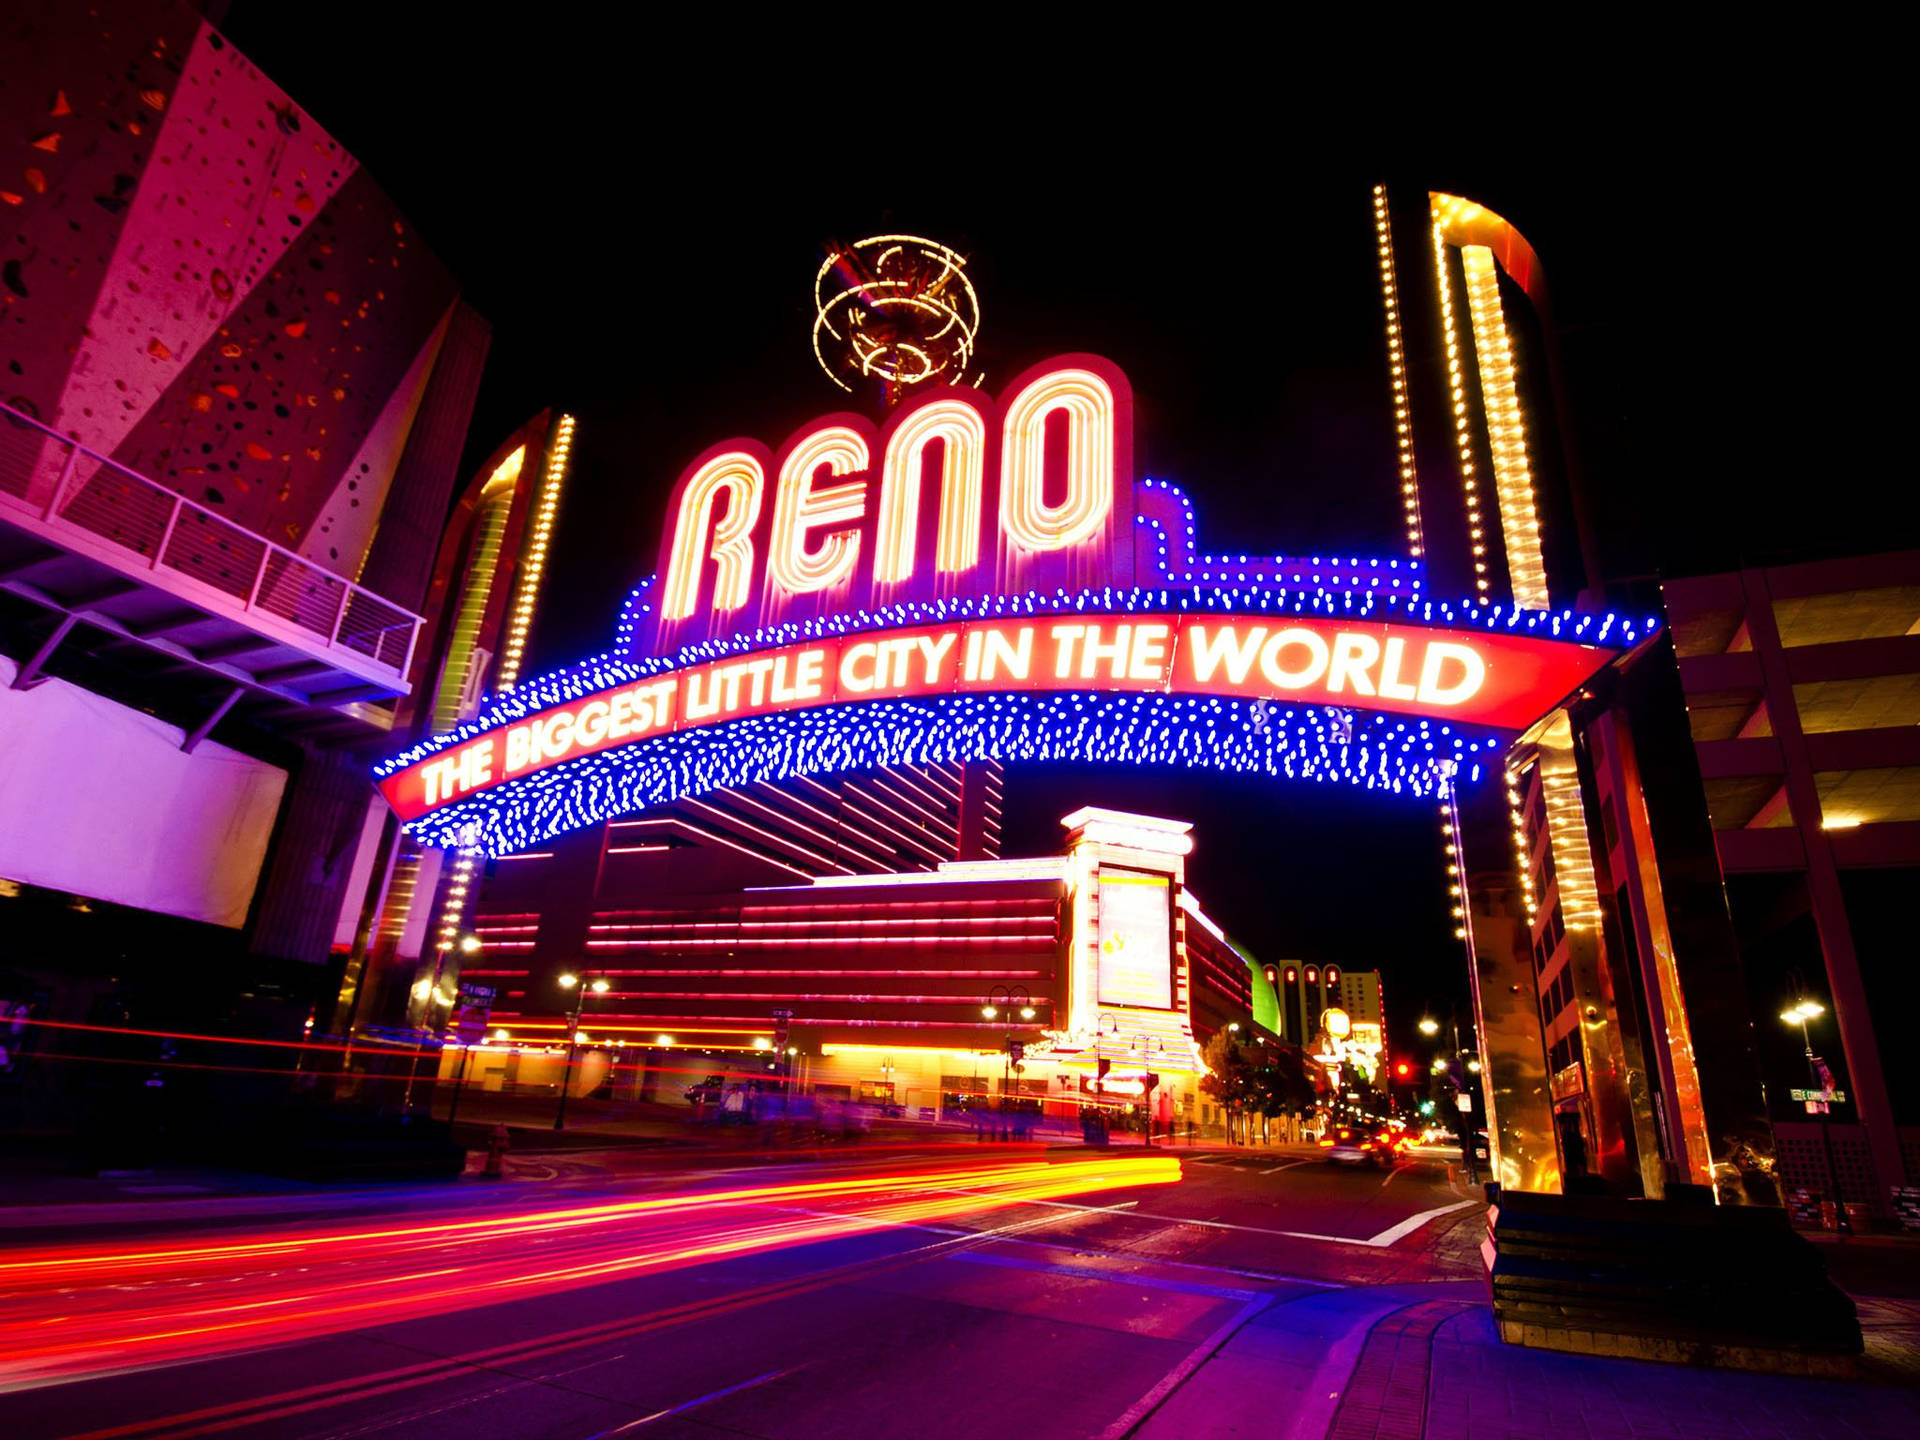 "The iconic Reno Arch stands proud above the cityscape." Wallpaper